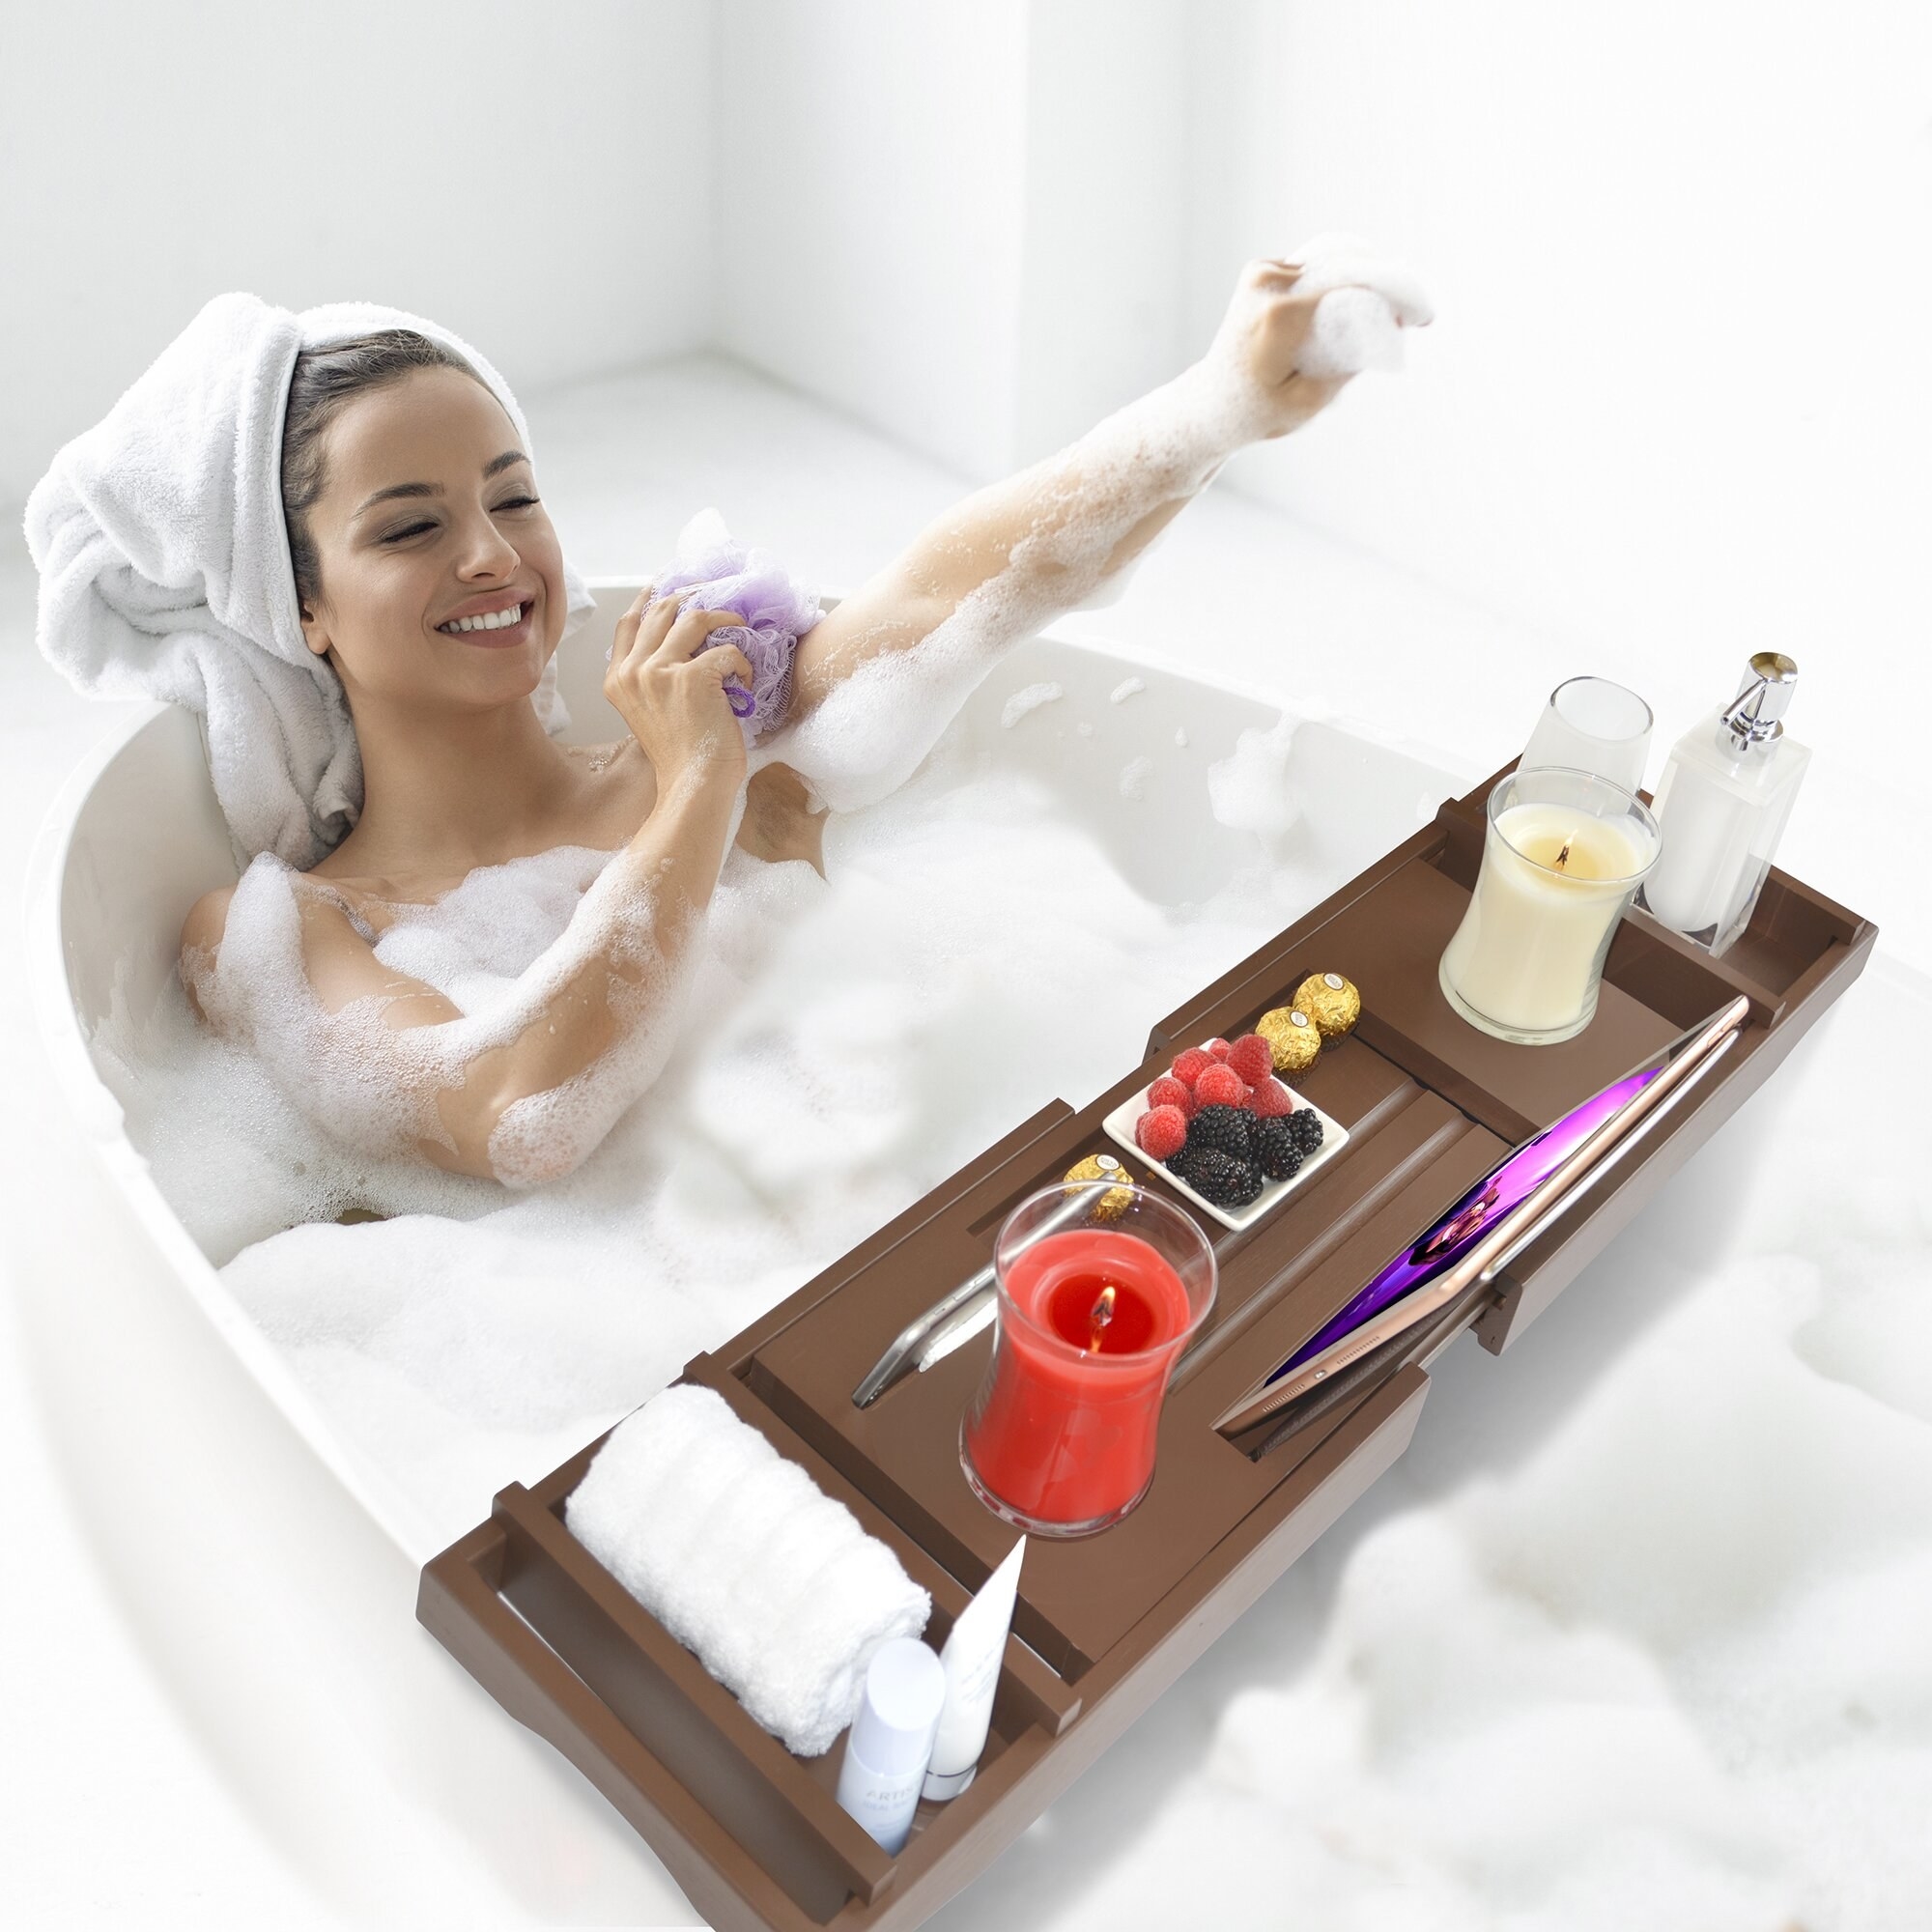 A woman in the bathtub with a caddy board over the tub, with a candle, food, and an electronic tablet